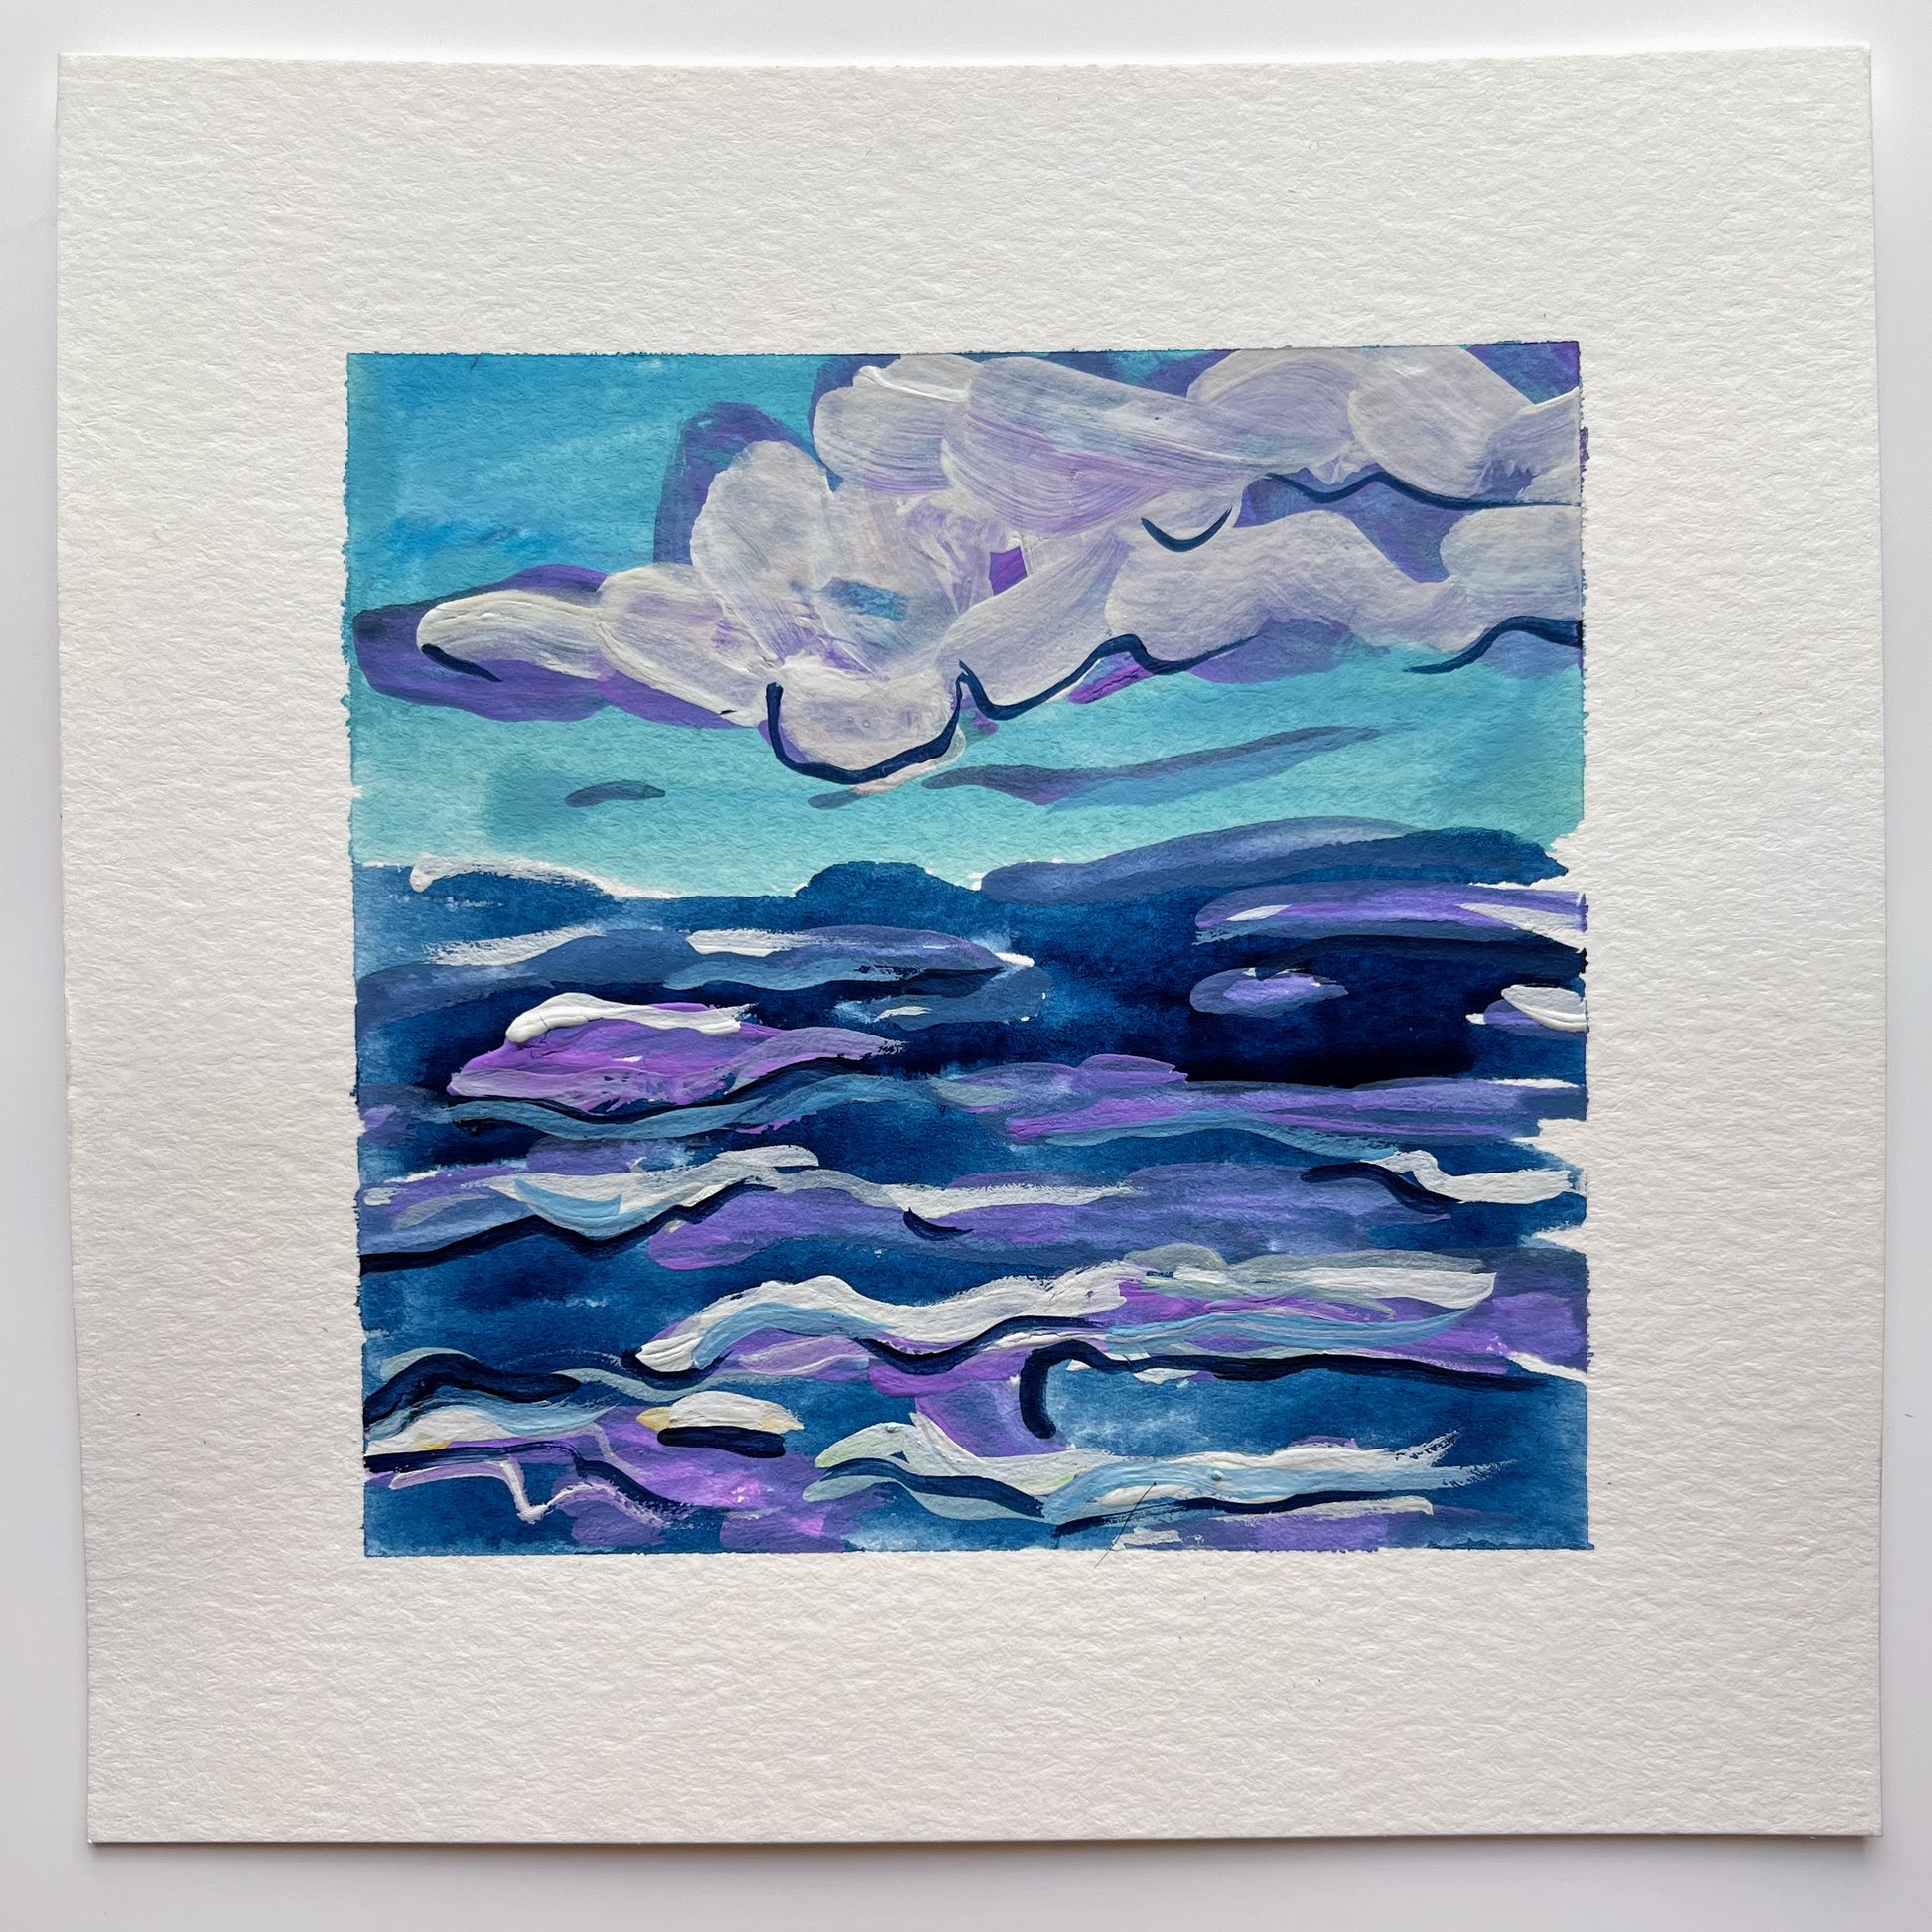 6x6-sally-j-goodrich-outdoor-collection-ocean- painting